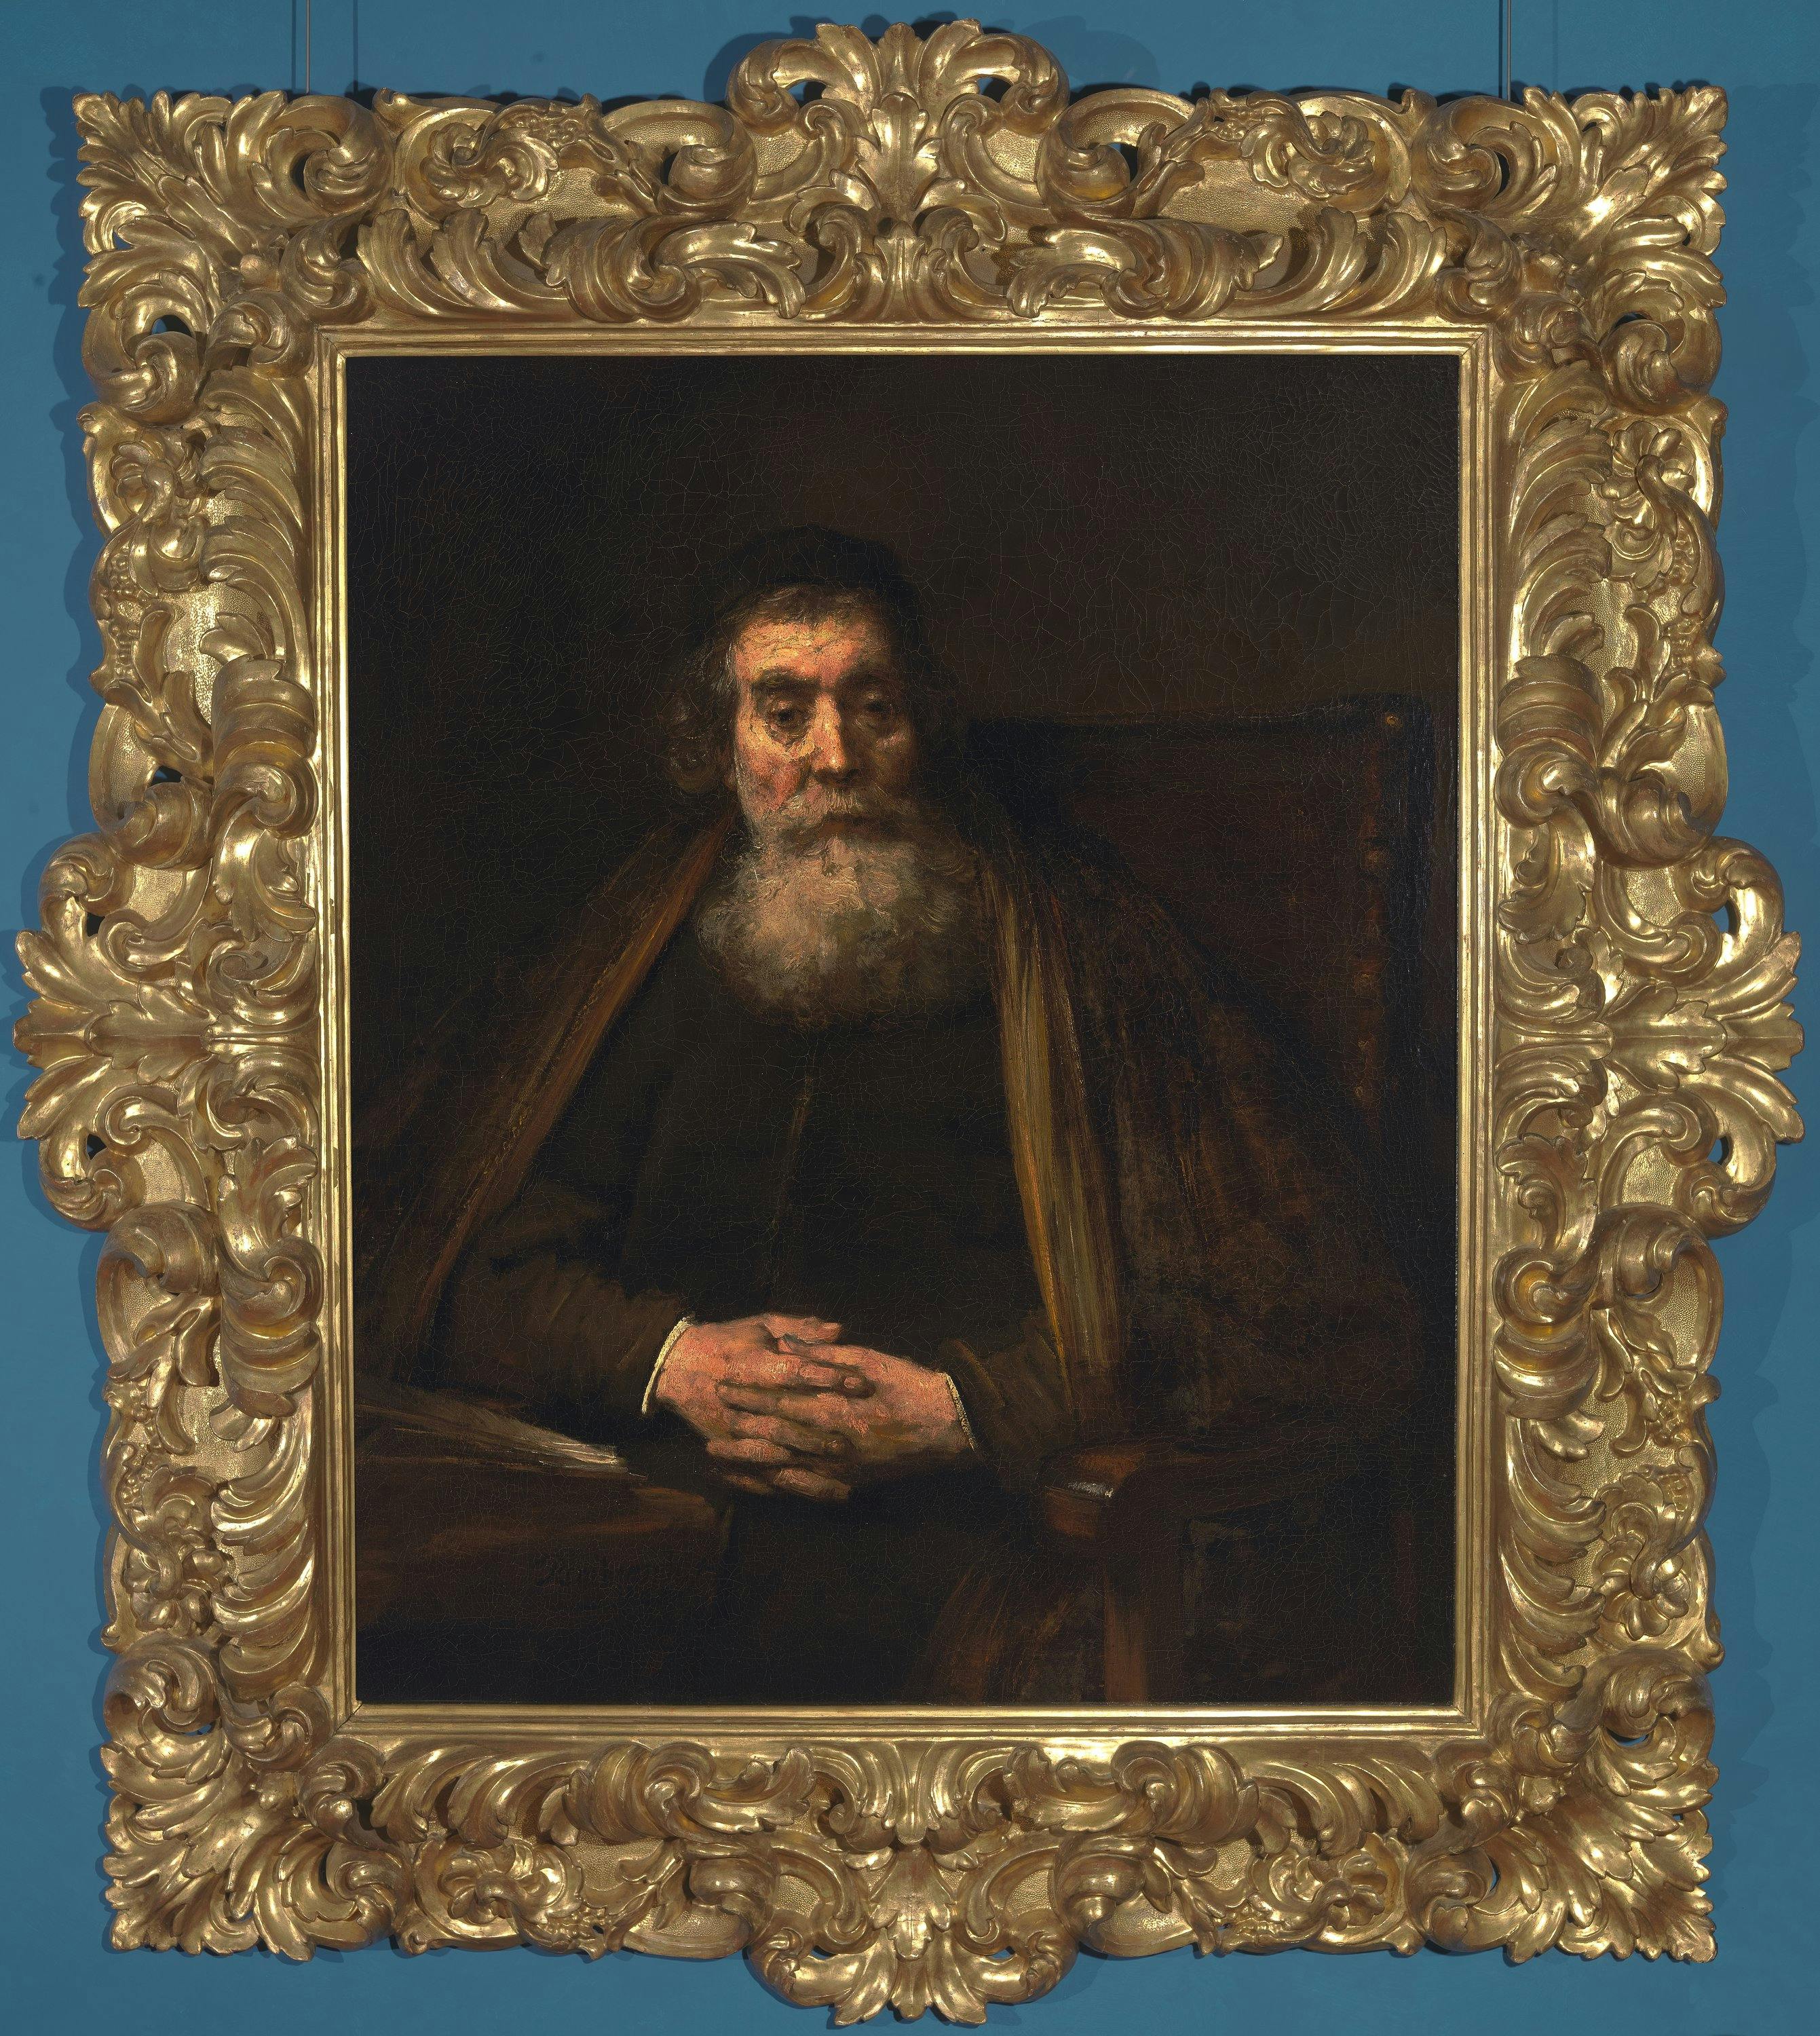 Portrait of an old man (The Old Rabbi)